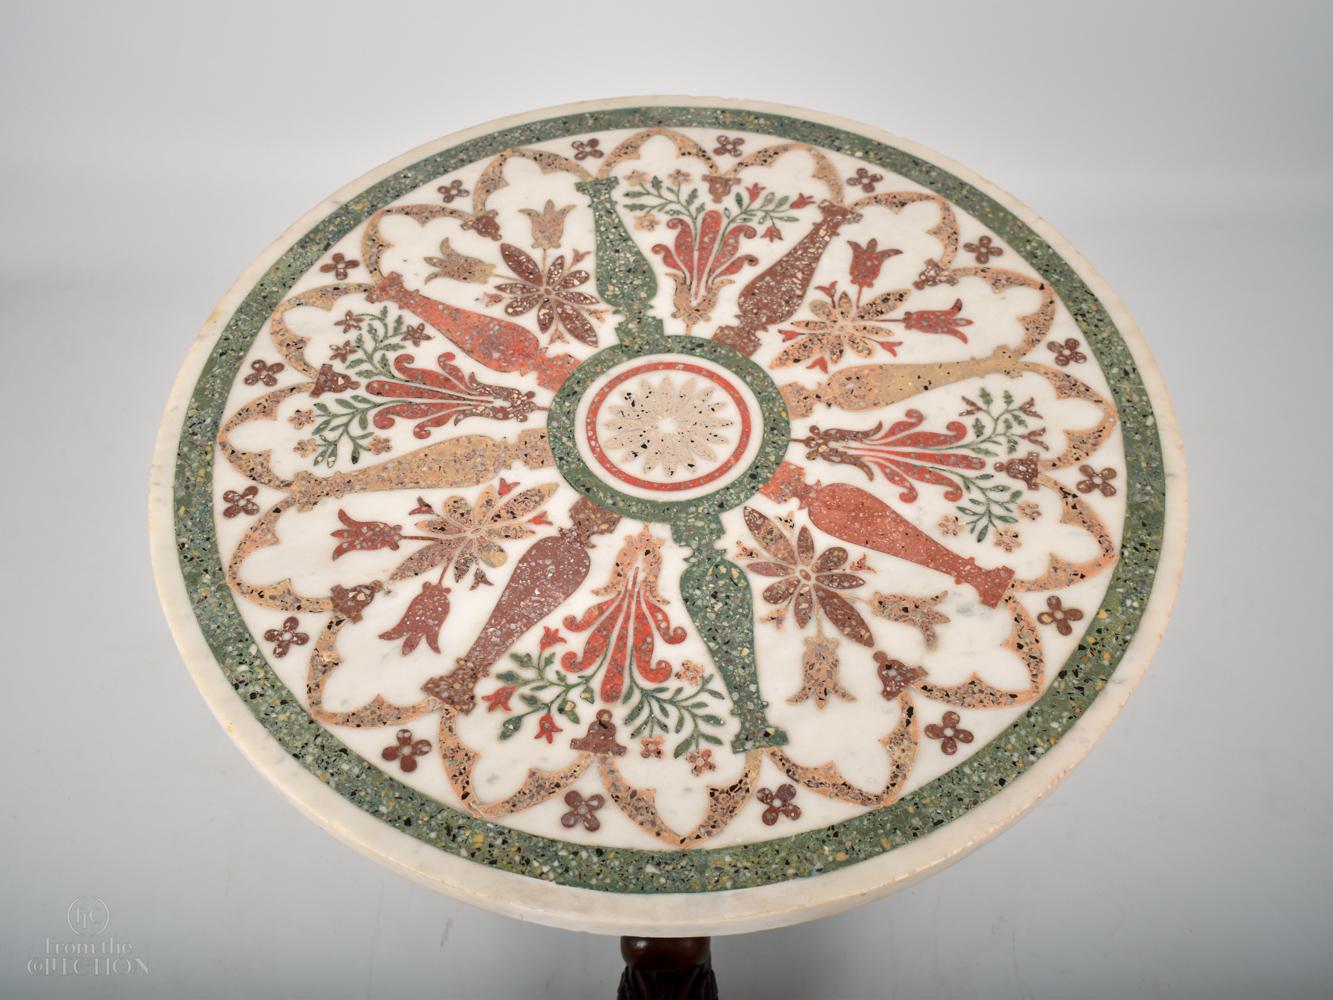 A beautiful Scagliola table top circular table inlaid with various exotic agates and marbles detailed in a roman style design. The 17th century top sits on a later William IV plinth of mahogany with three splayed legs on claw feet. An extremely fine